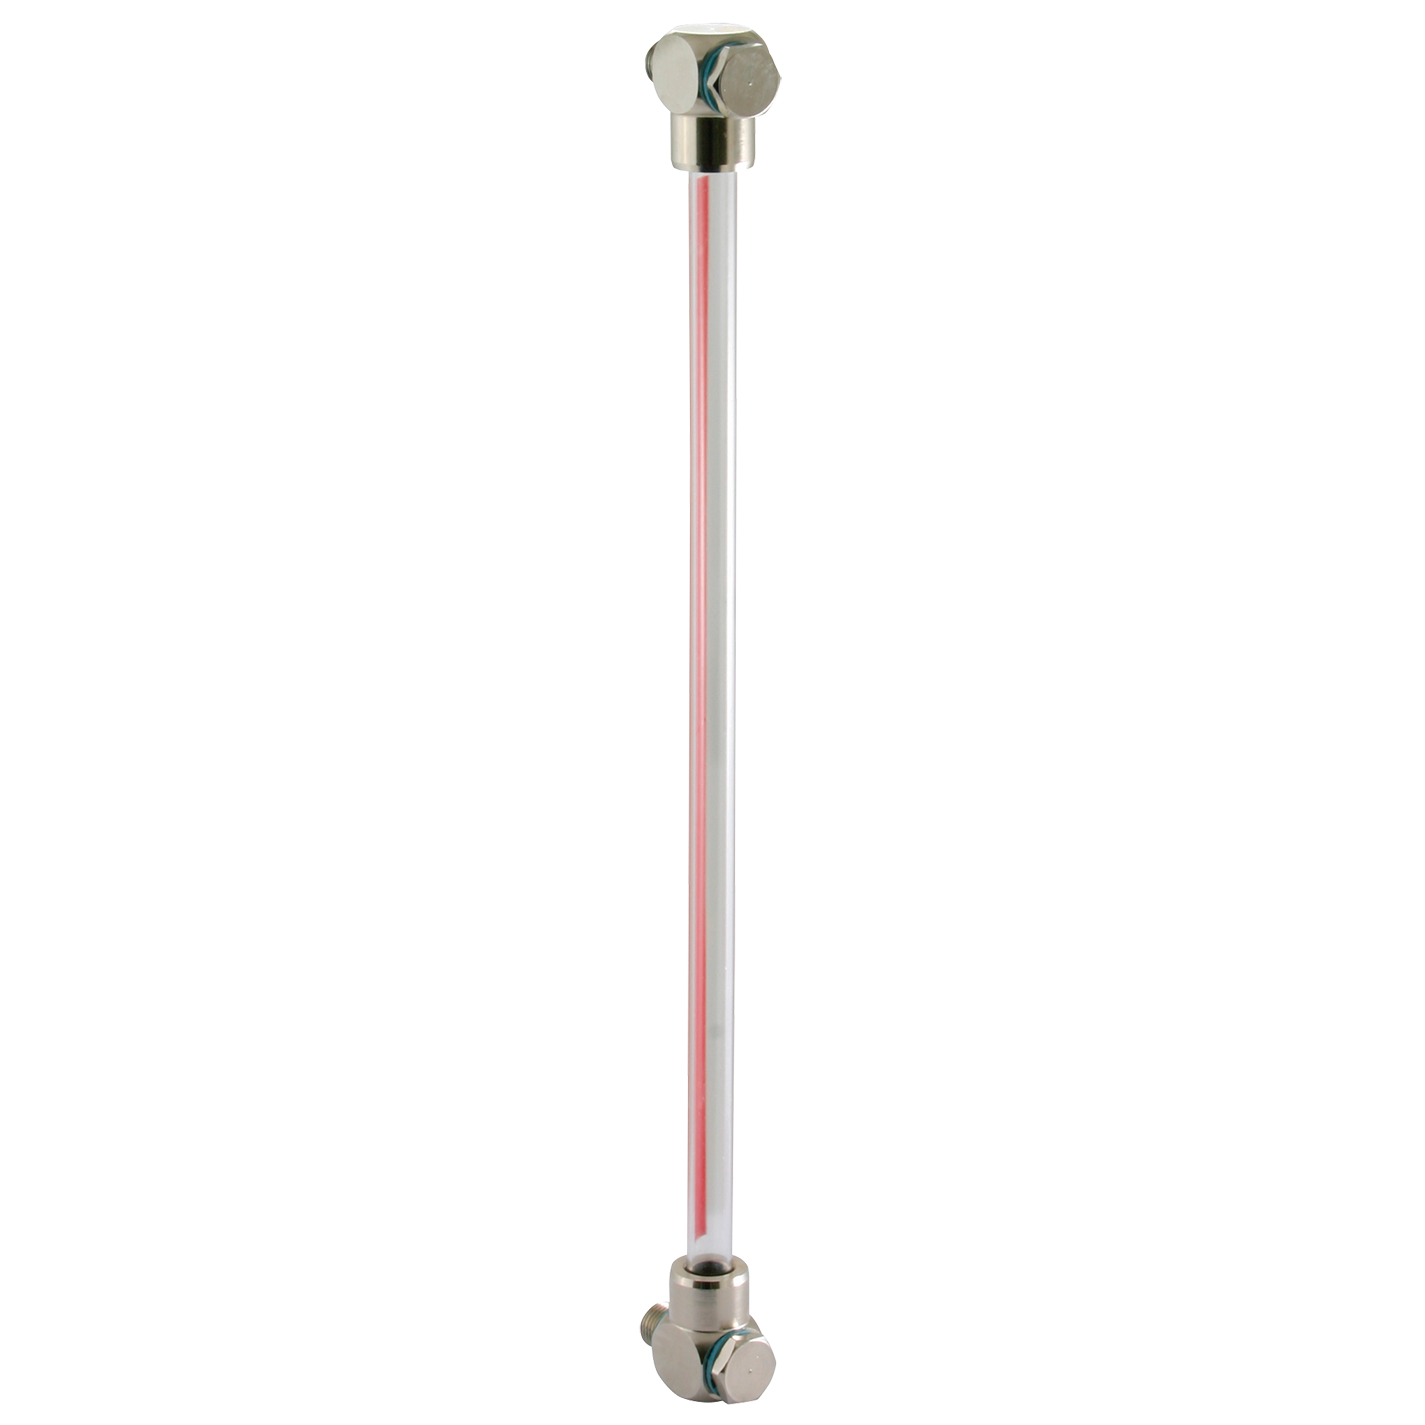 1/2" BSP Fluid Level Gauge W/O Thermometer Centres 800mm